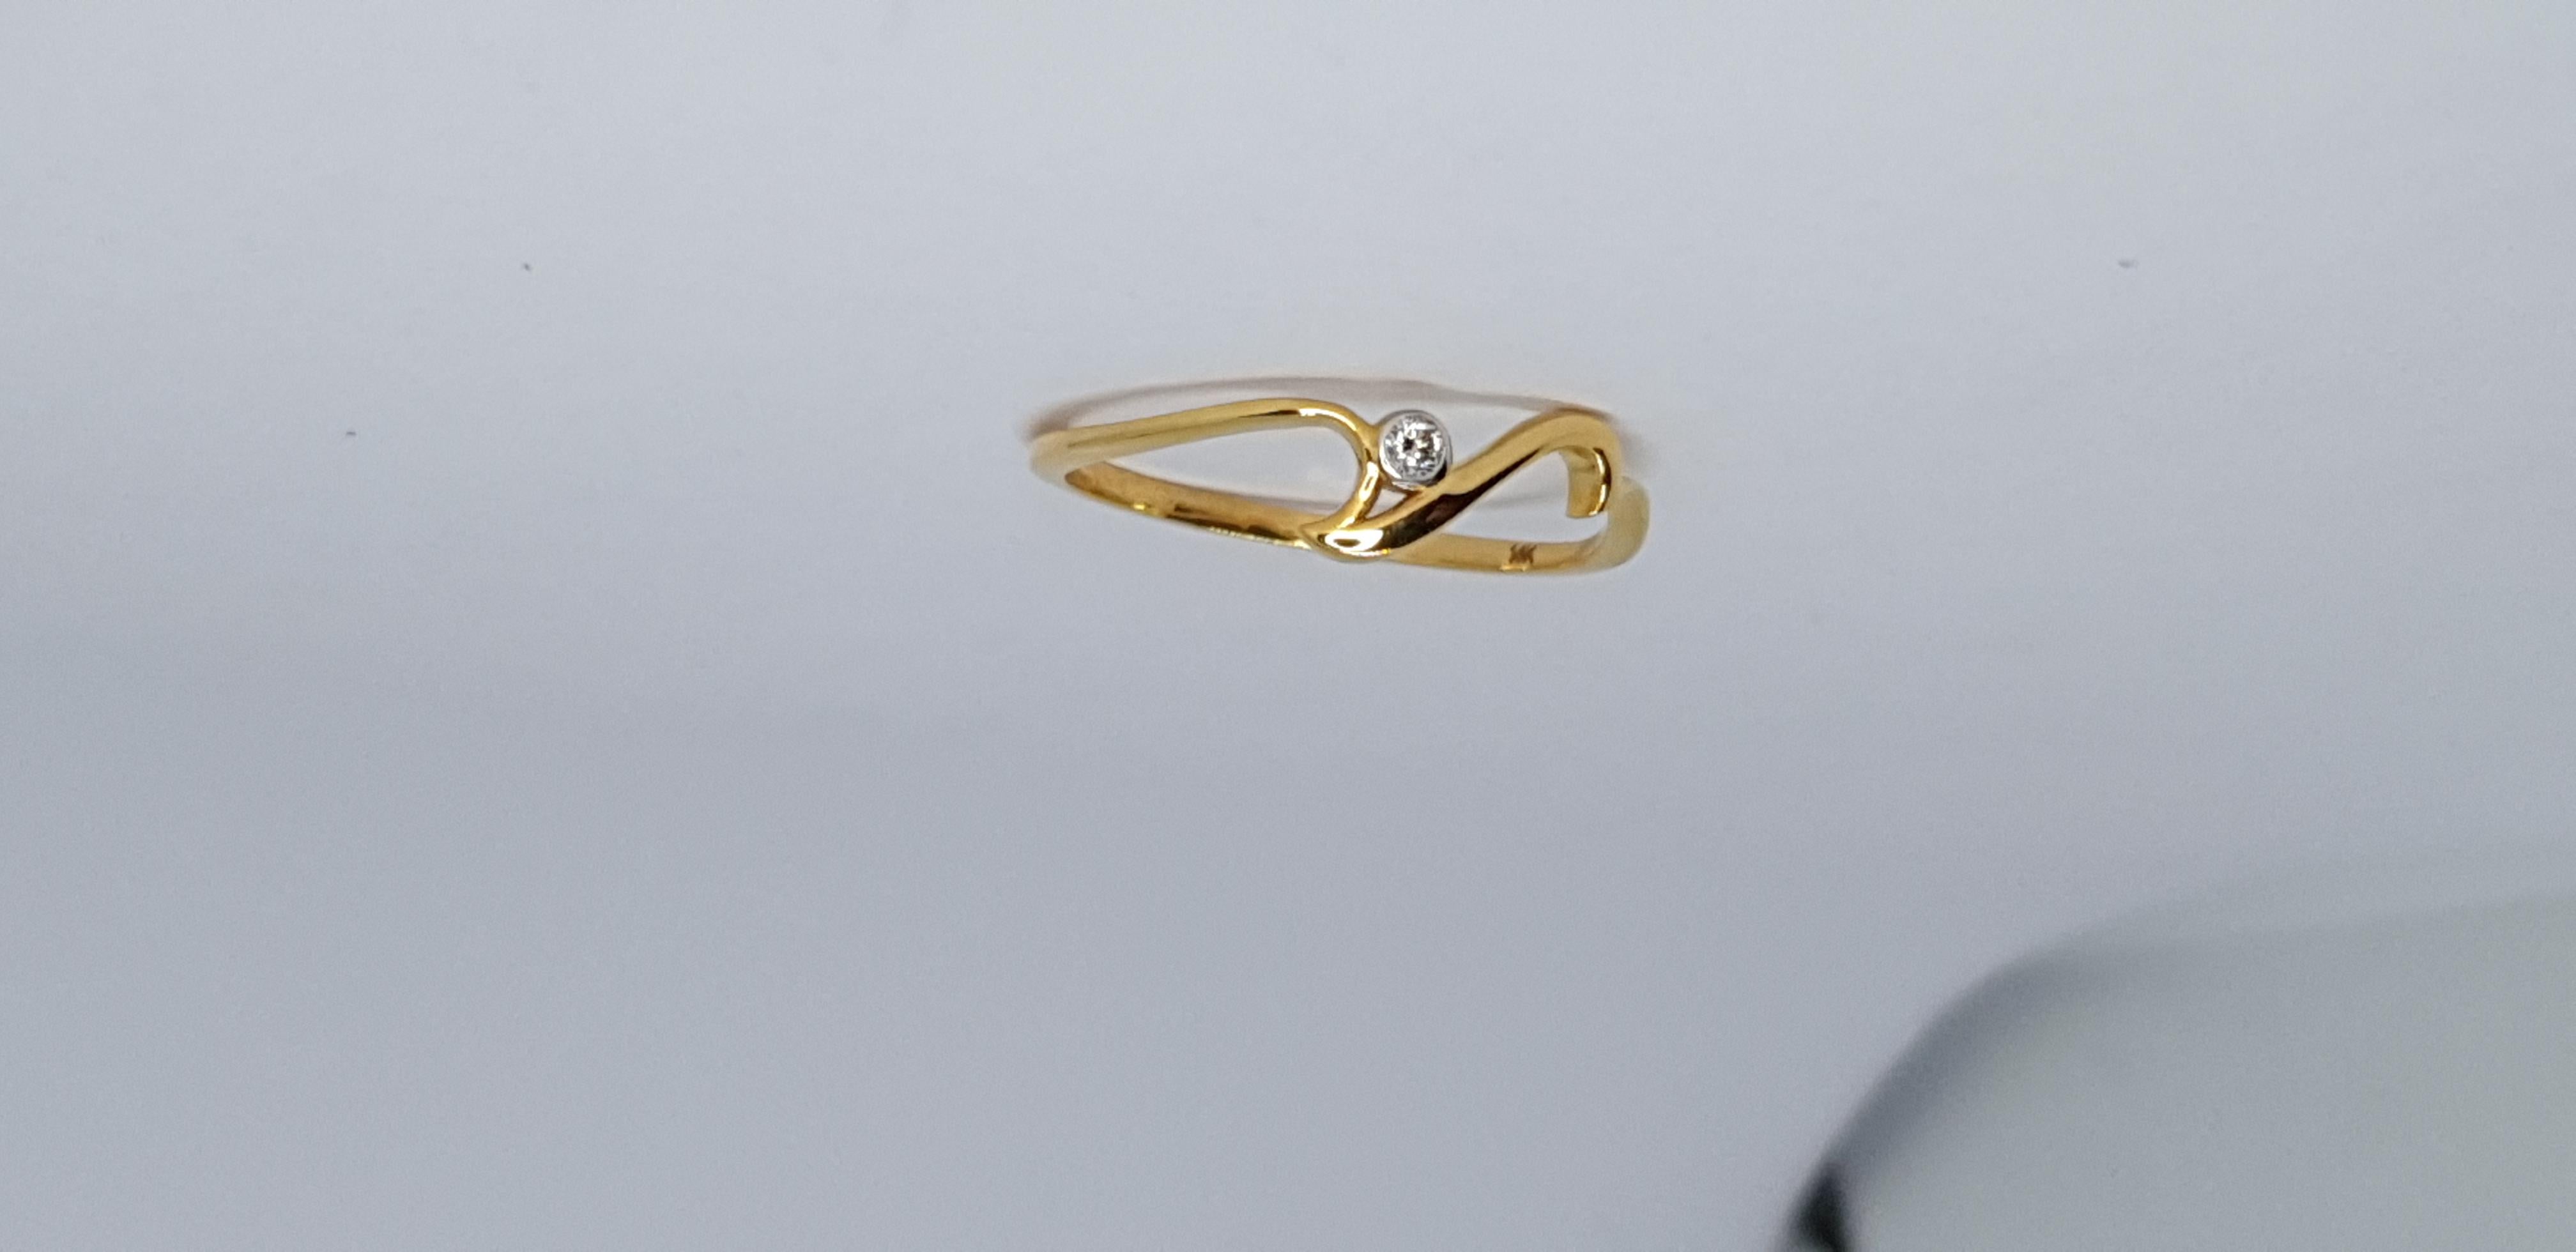 For Sale:  Natural Diamond Wave Ring 14K Solid Gold Dainty Ocean Lover Jewelry Gift. 4